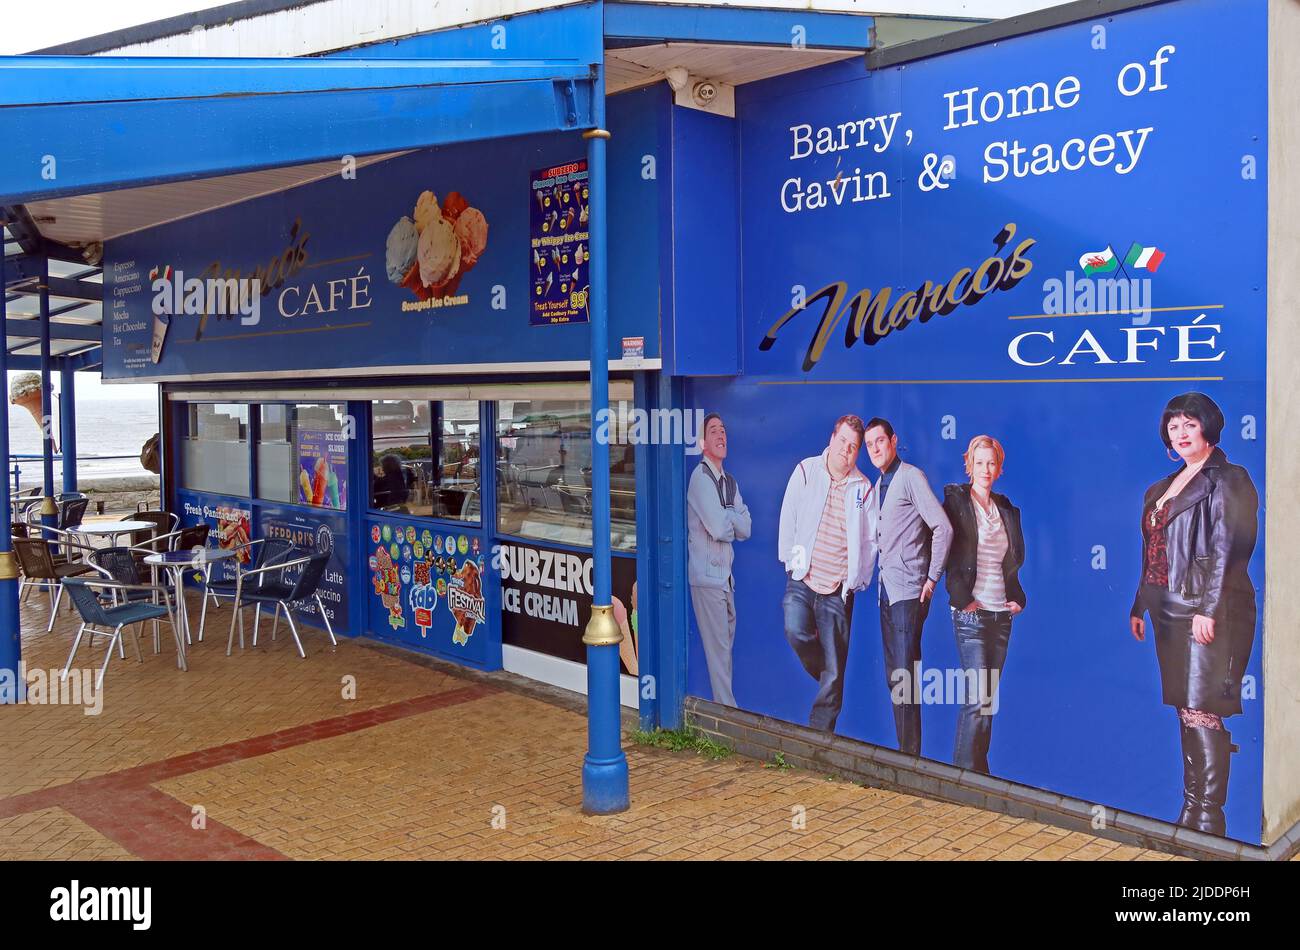 Marcos Cafe ,Barry island, Promenade, Barry , Vale of Glamorgan, Wales, CF62 5TQ Stock Photo